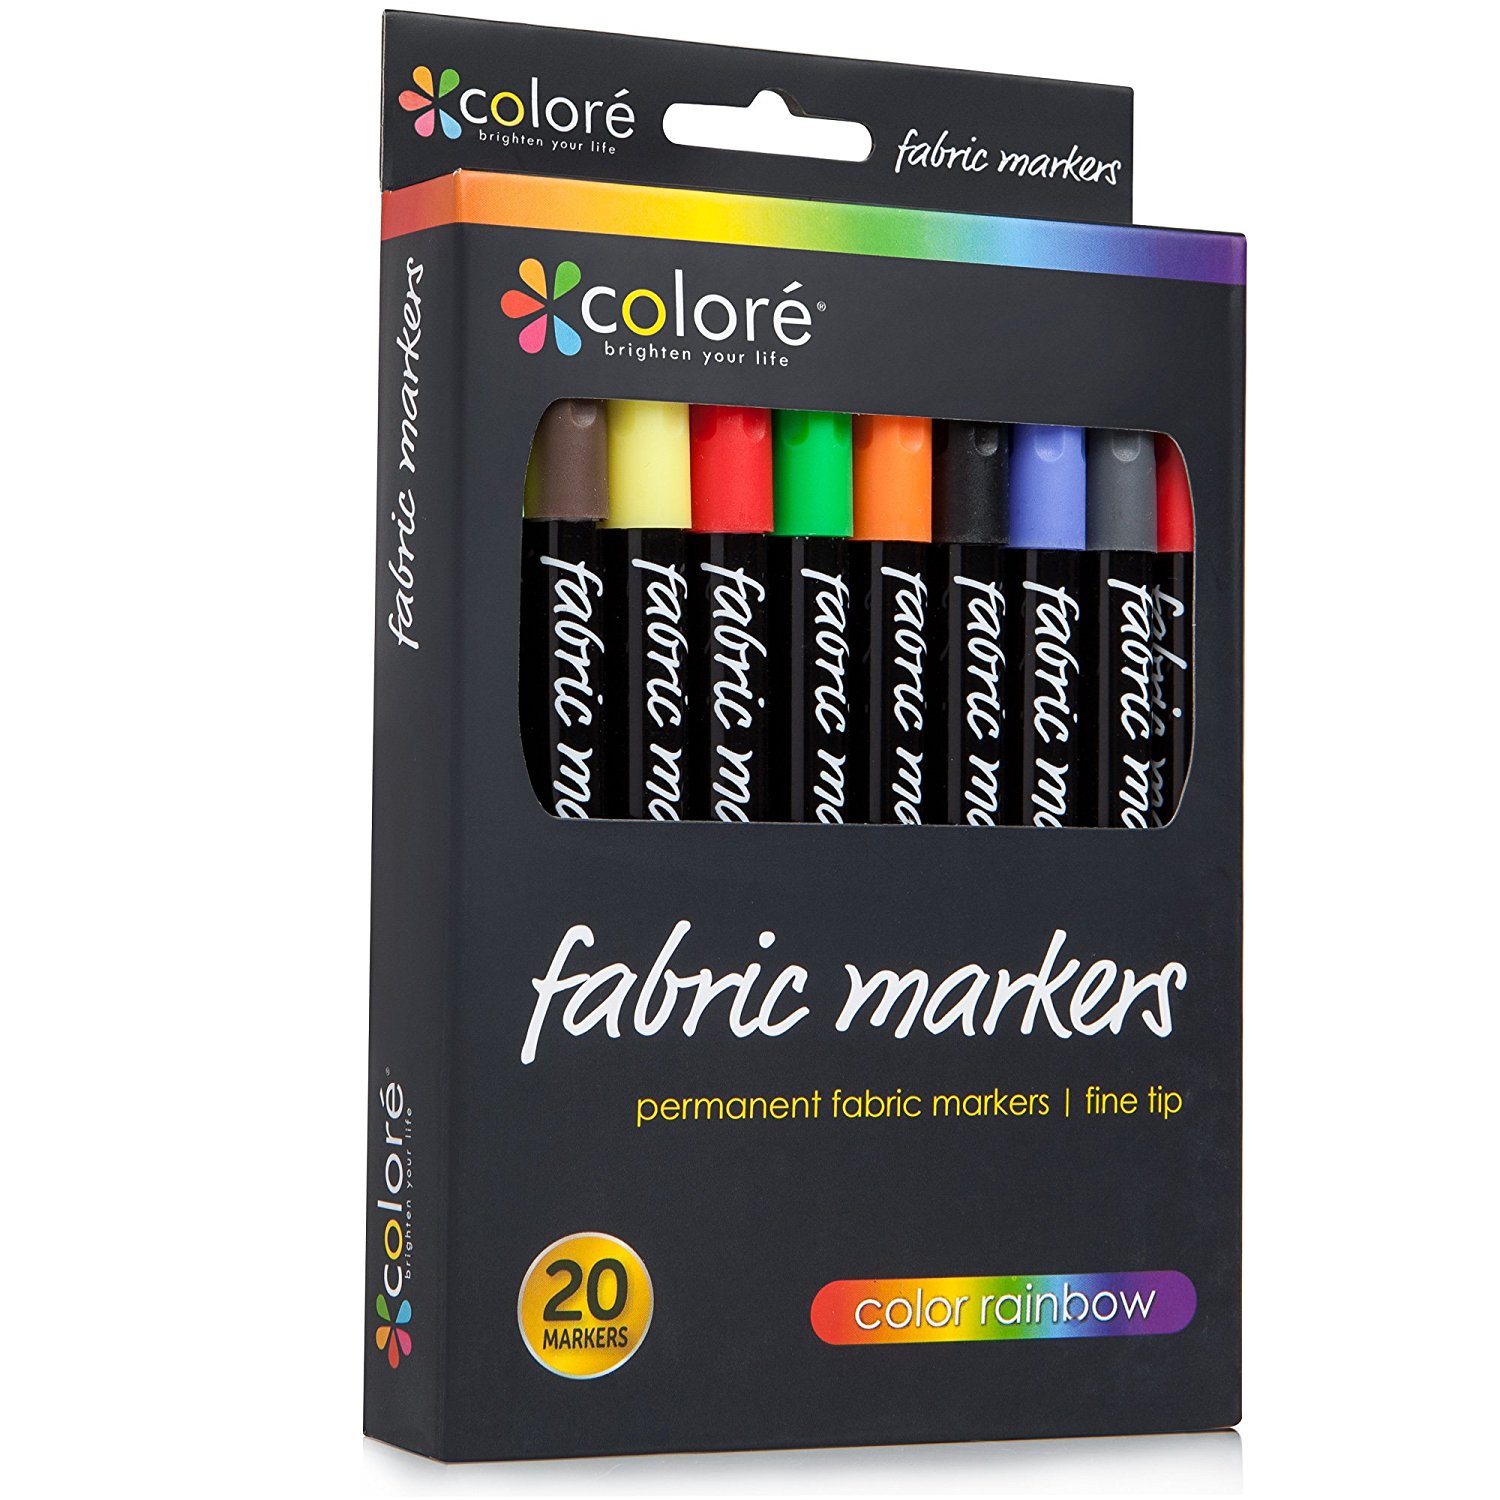 Colore Premium Fabric Markers – Set of 20 – Just $9.99!